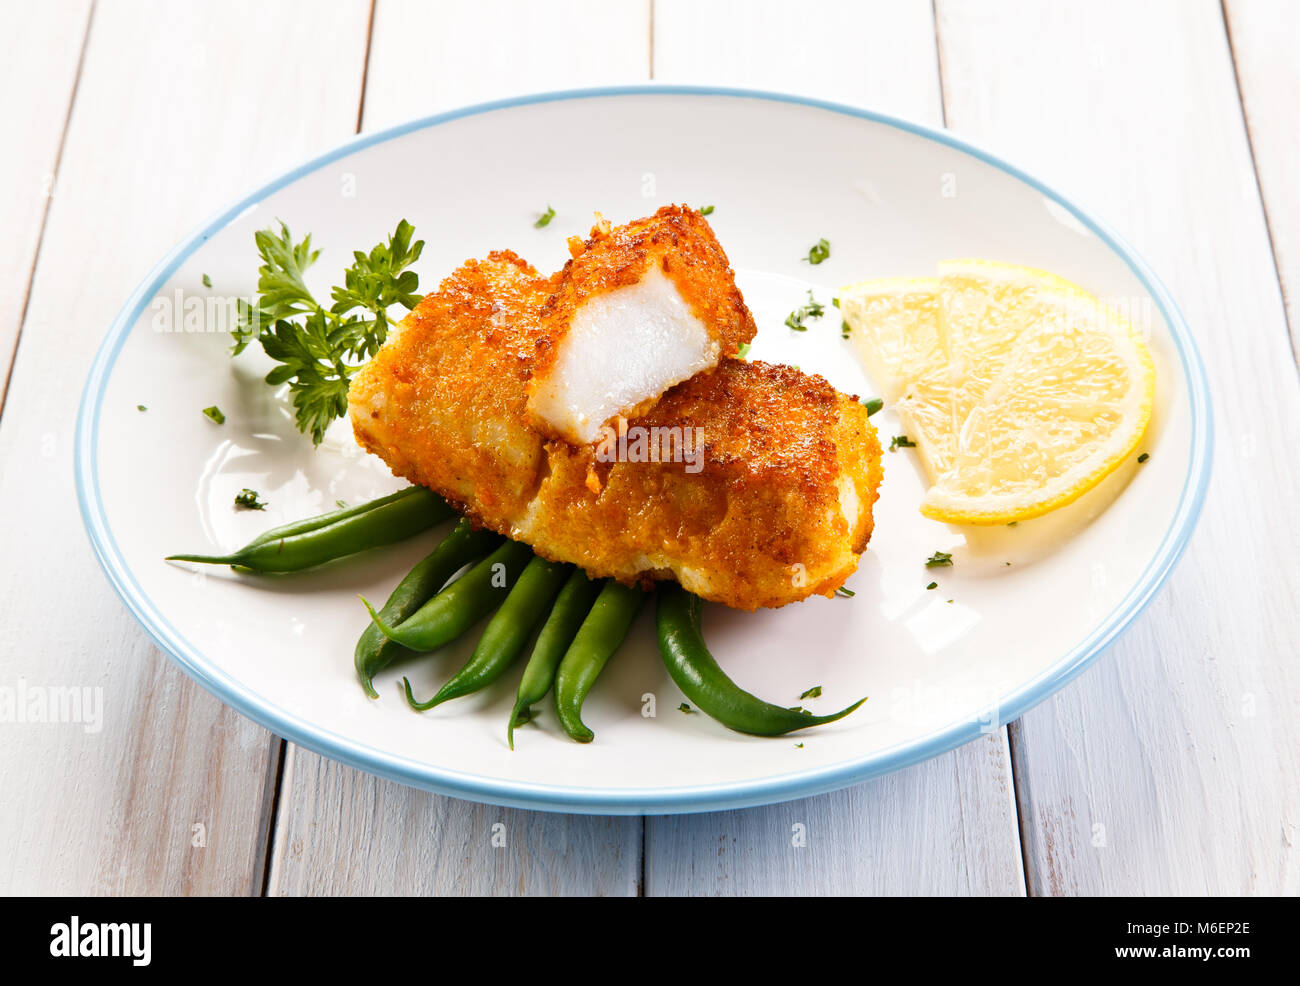 Fish dish - fried fish fillets and vegetables Stock Photo